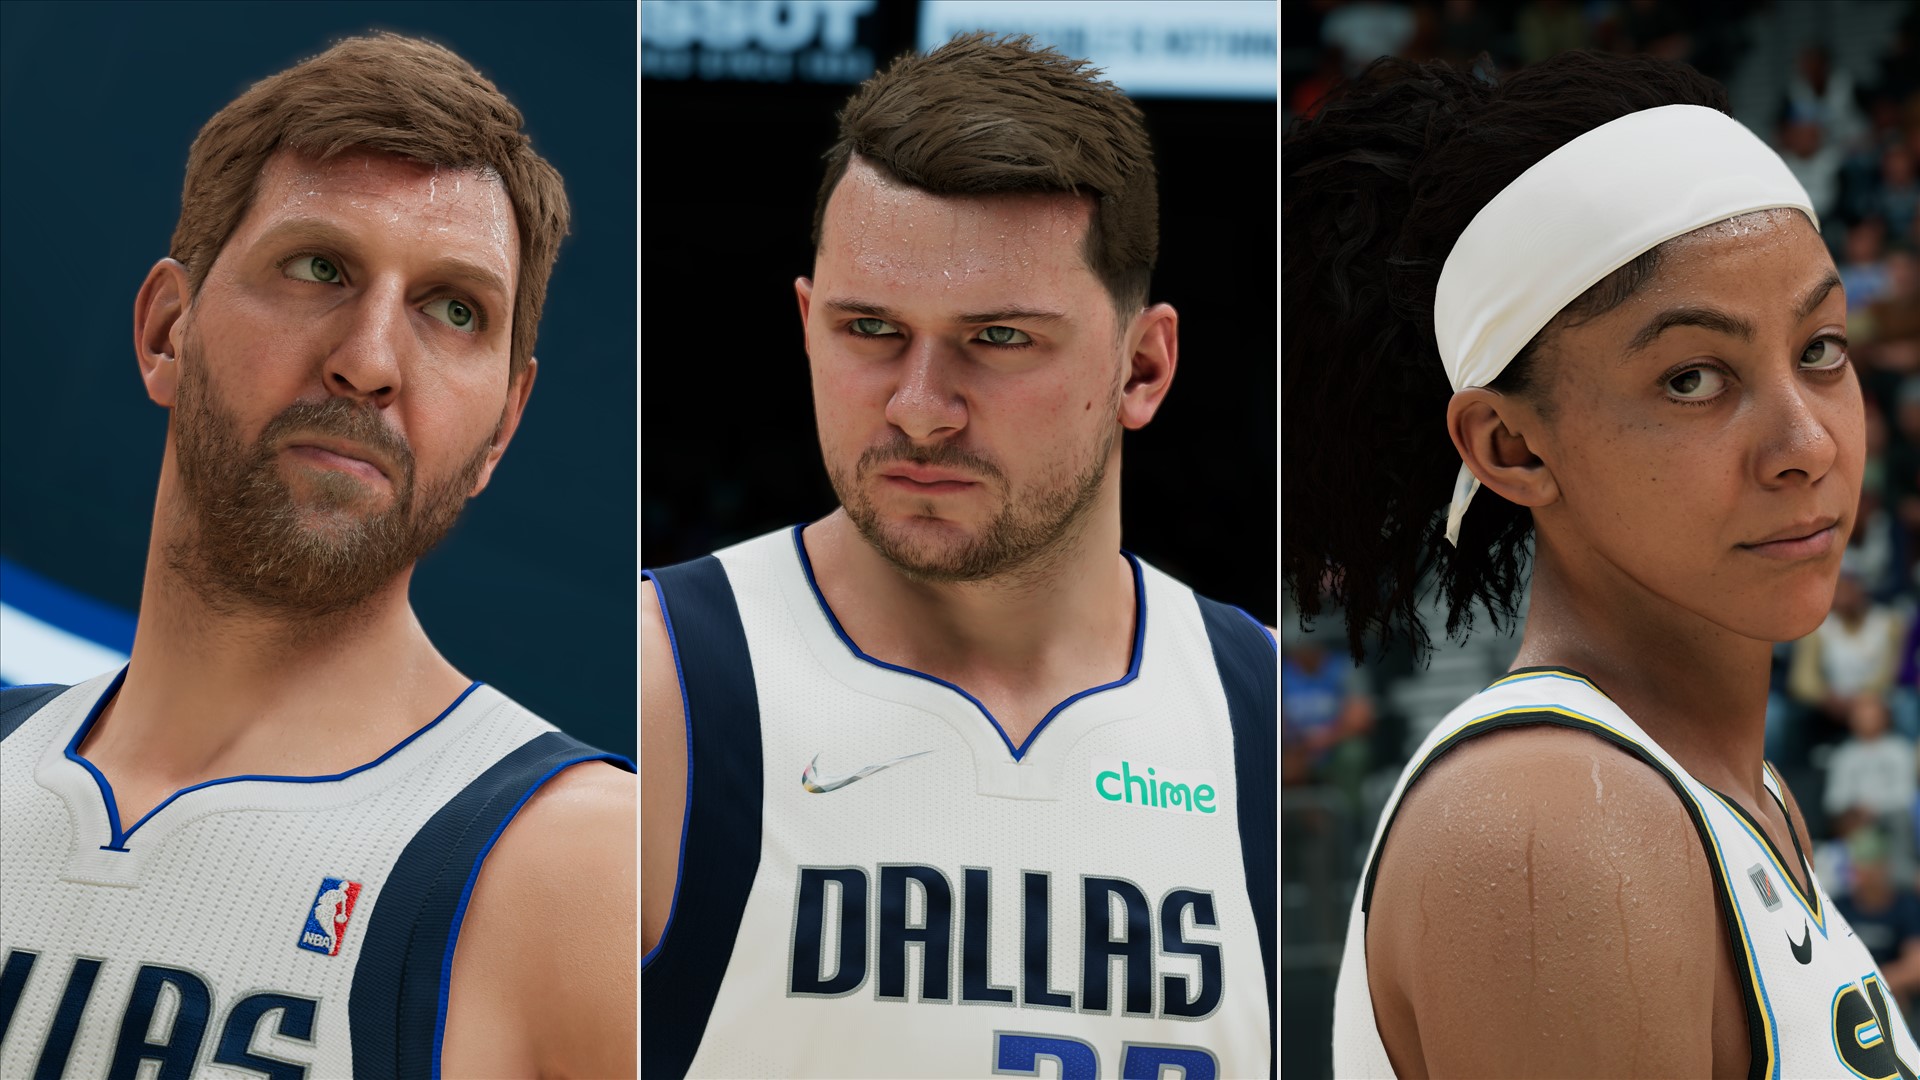 NBA 2K22: First In Game Look At Cover Athletes Luka Doncic, Dirk Nowitzki And Canadace Parker As Part Of New Features. NBA.com Australia. The Official Site Of